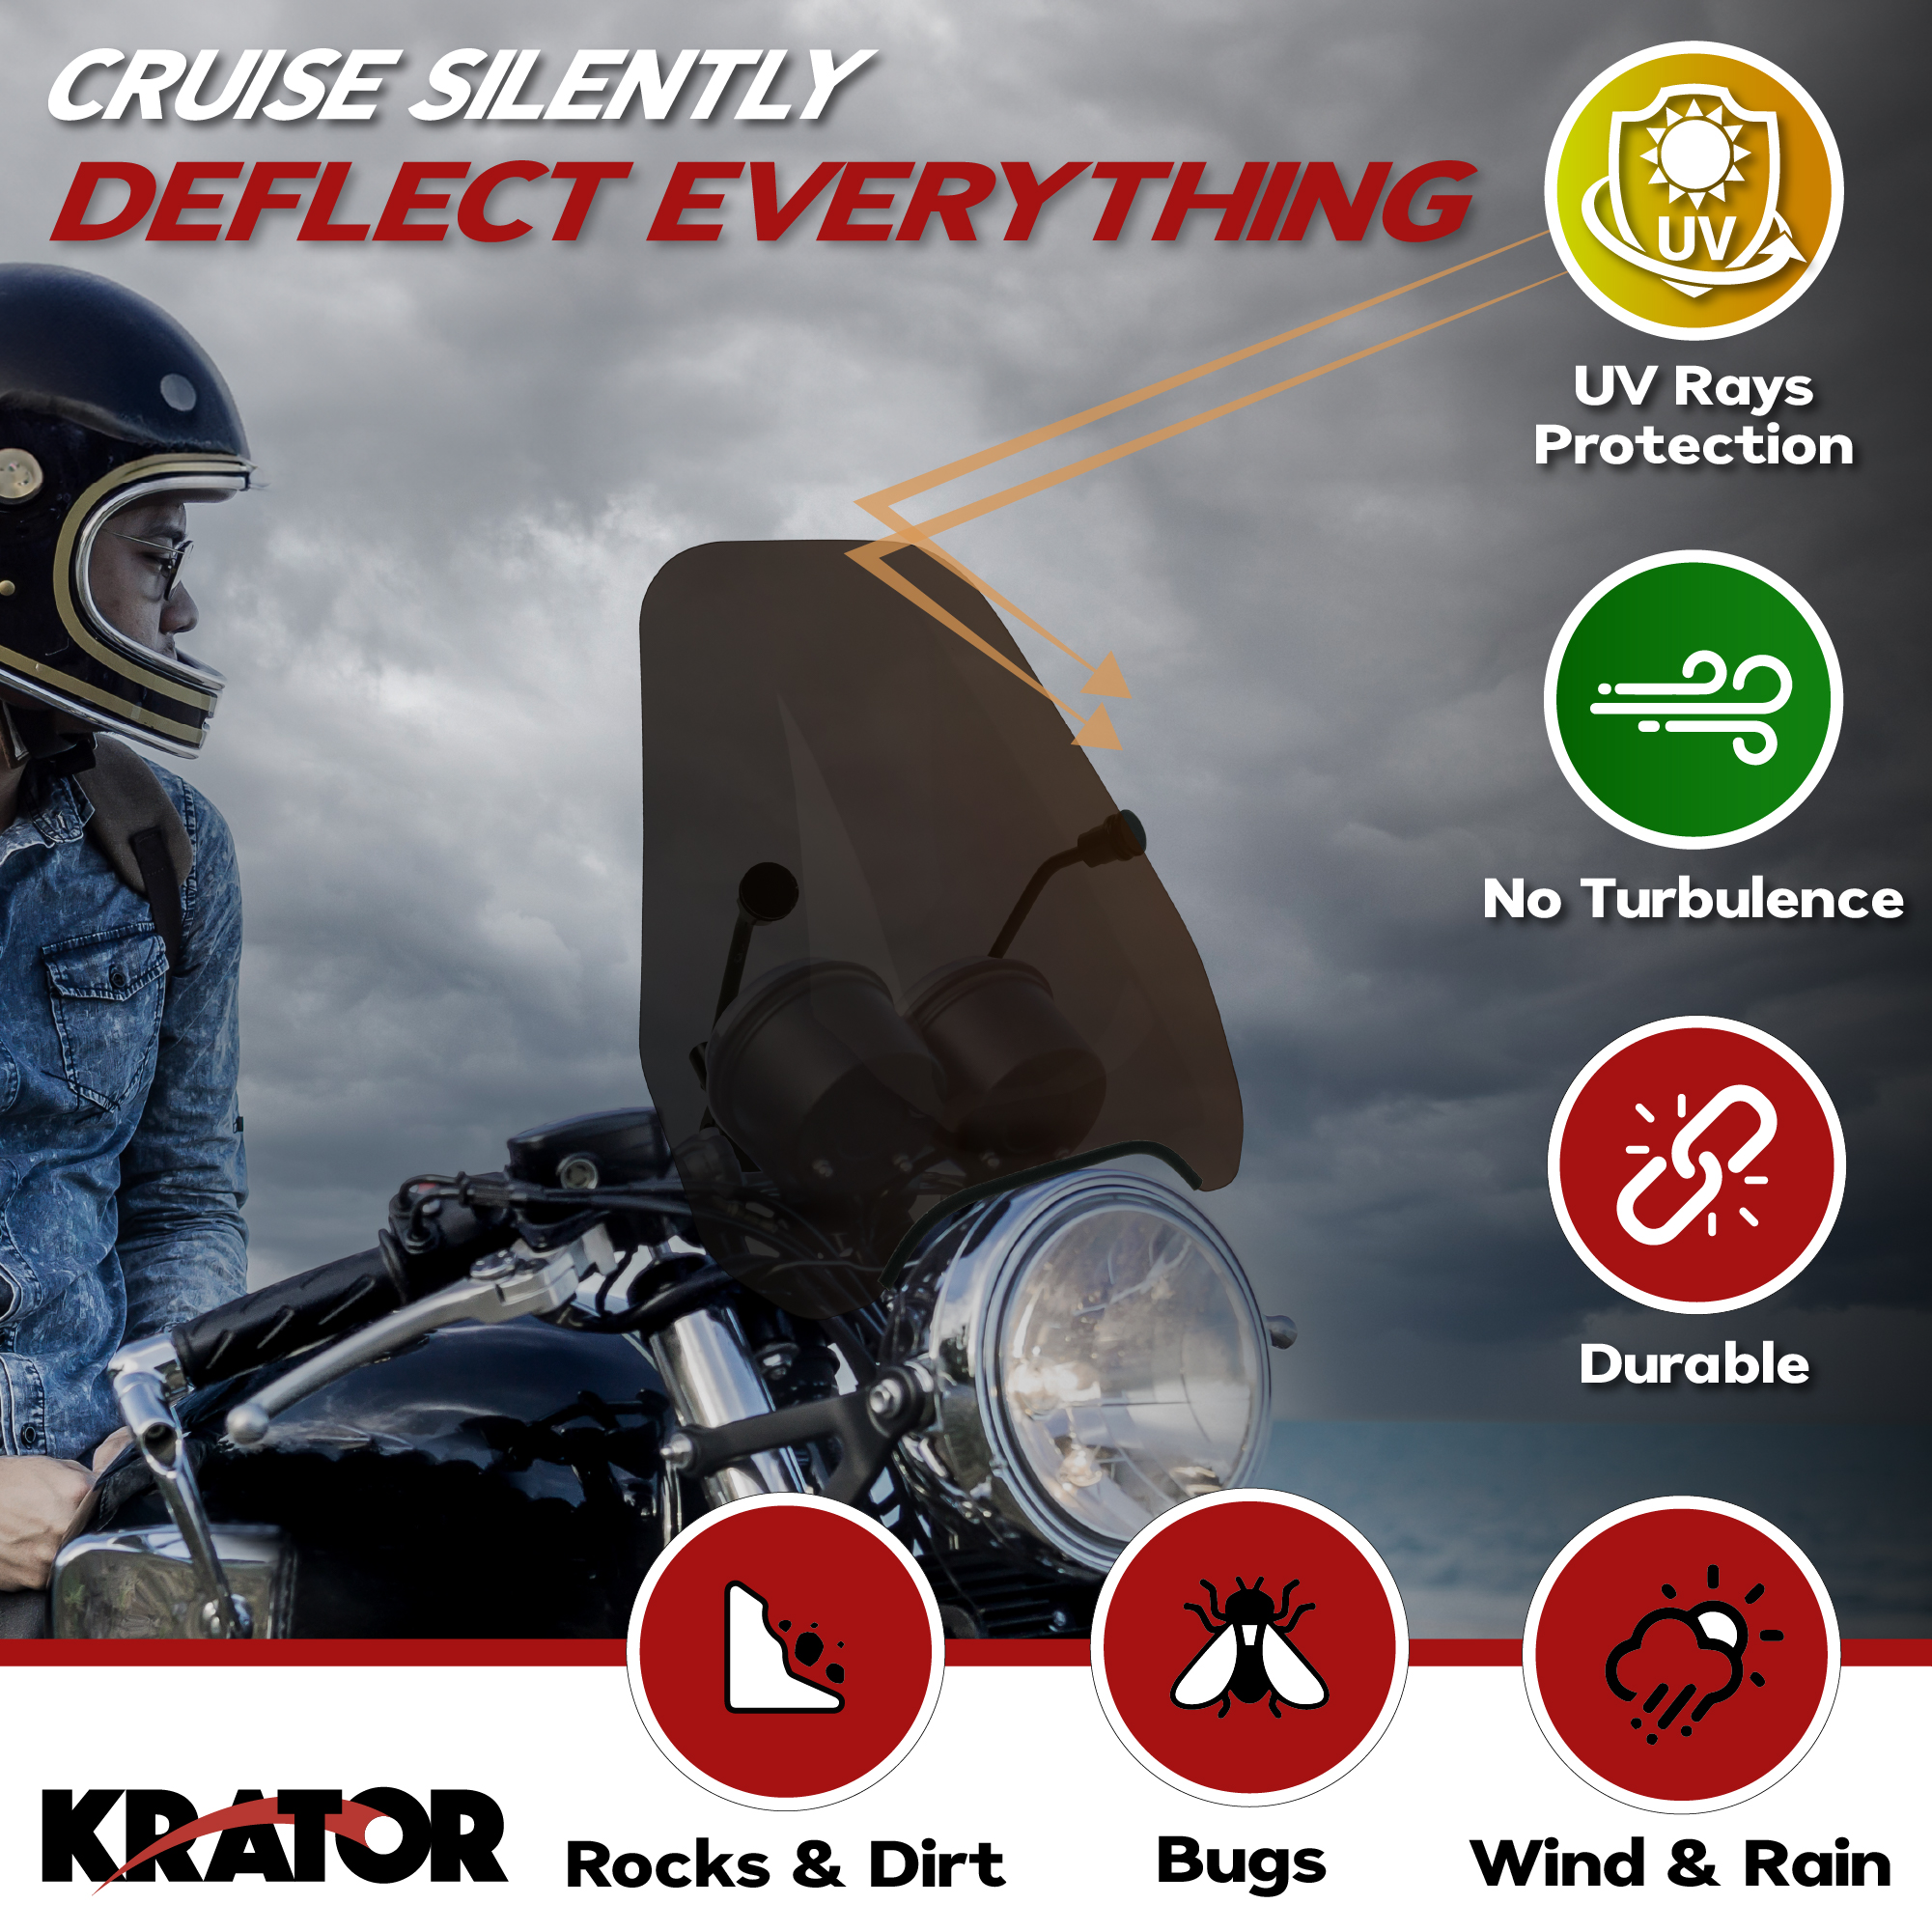 Krator 15" Smoke Tinted Windscreen Windshield Compatible with Harley-Davidson Sportster XL883 Iron (2012-2020) Fits 7/8" or 1"